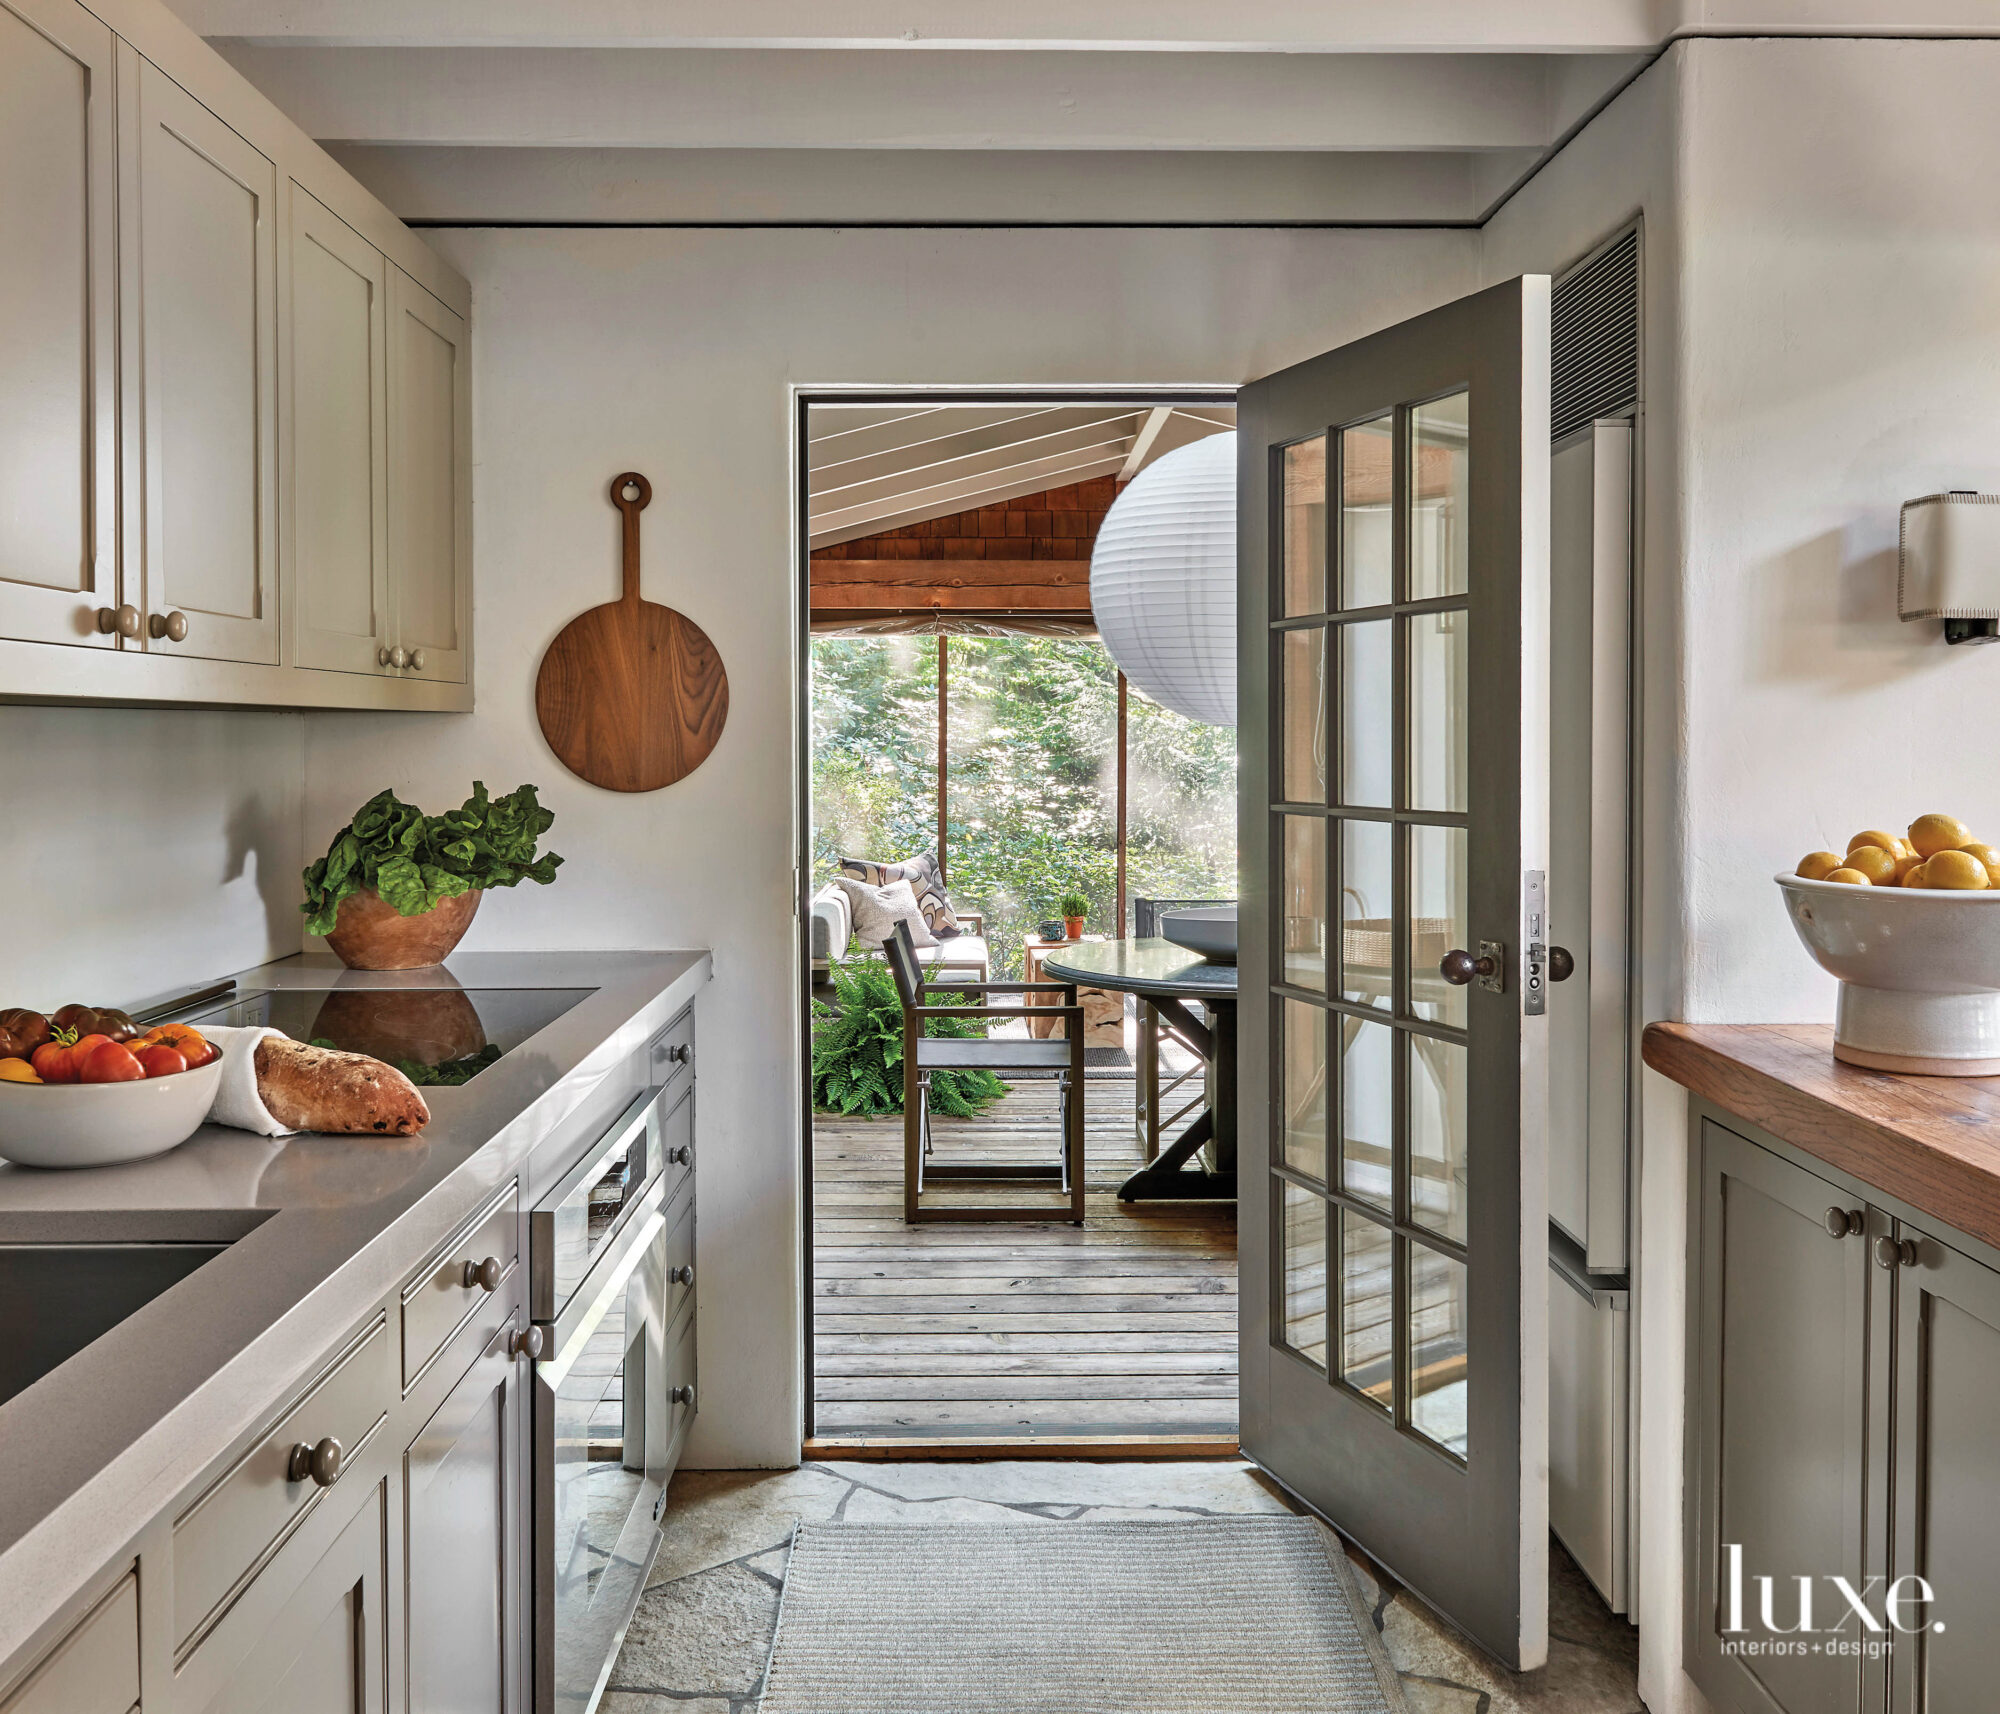 A gray, updated kitchen stands out from the rest of the cabin-like home.